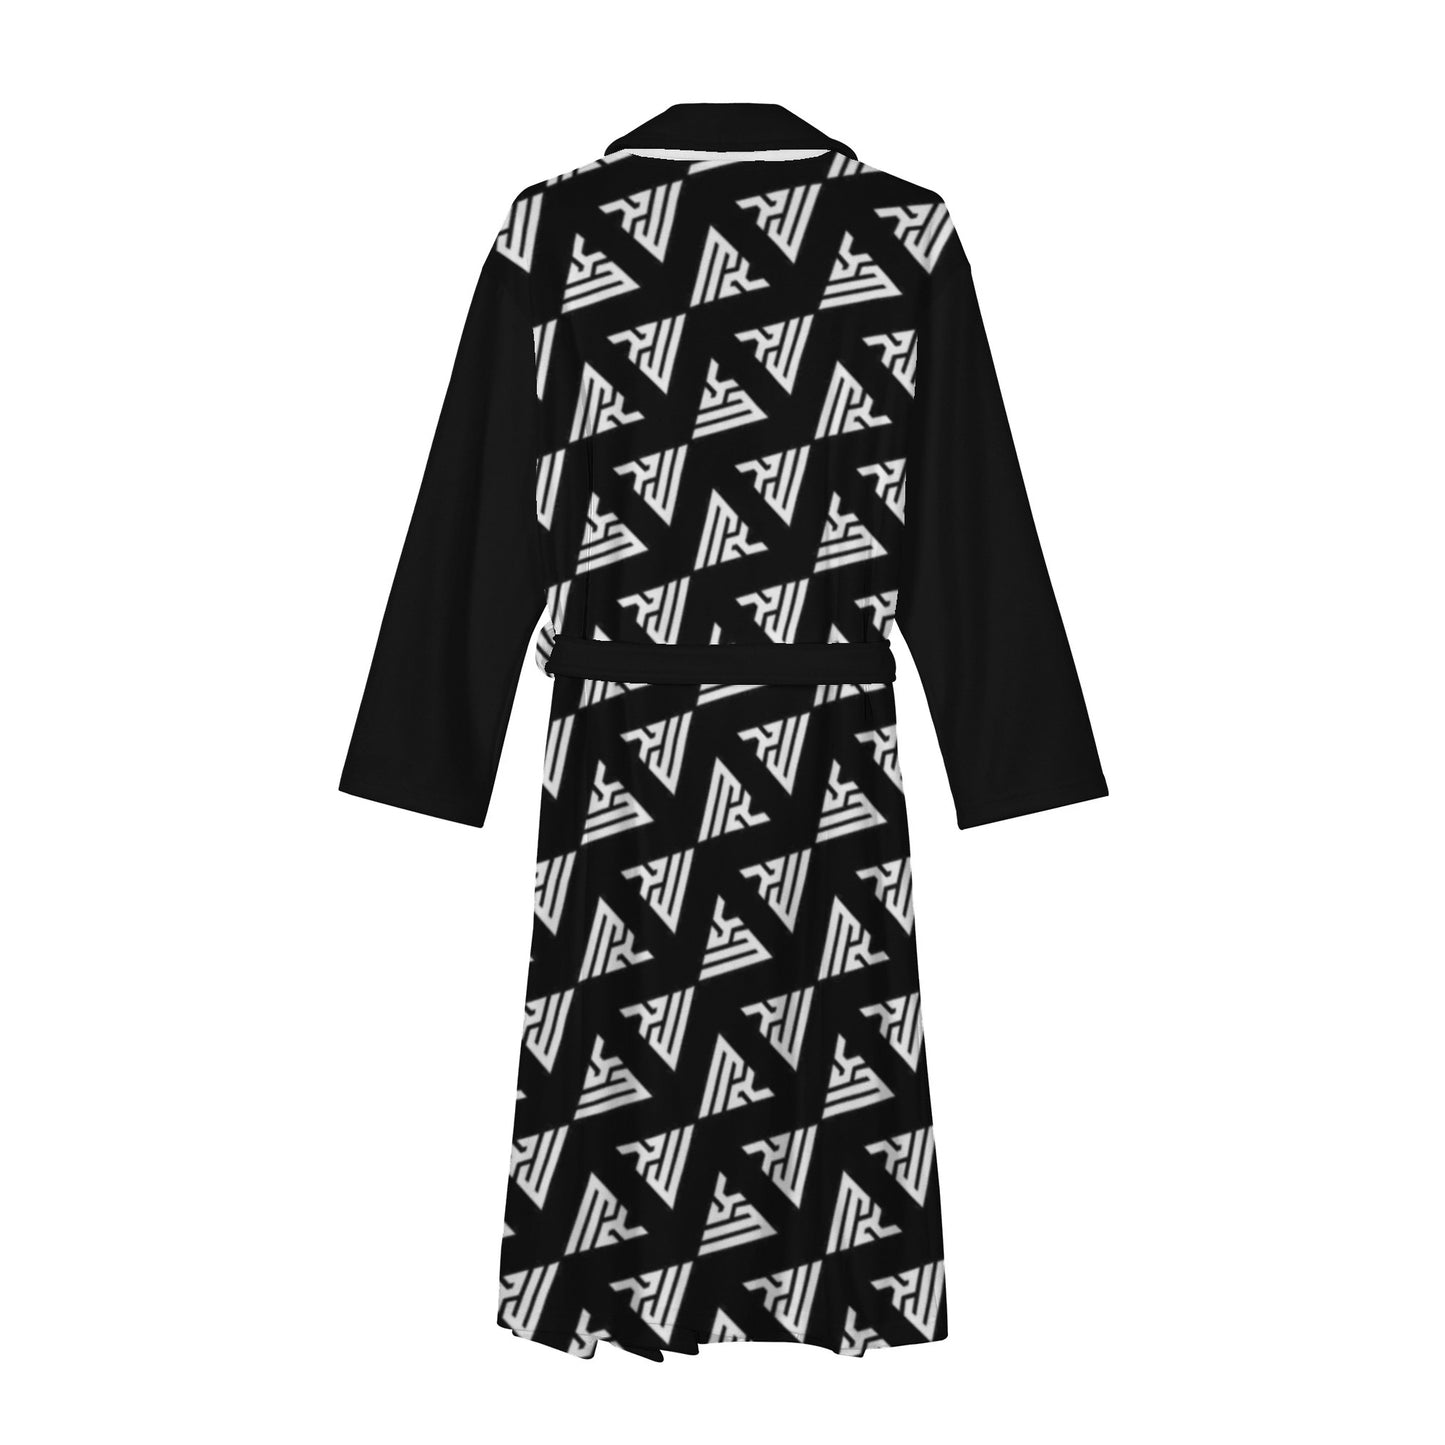 Rongoworks Valentina II Womens Bathrobe Rongoworks